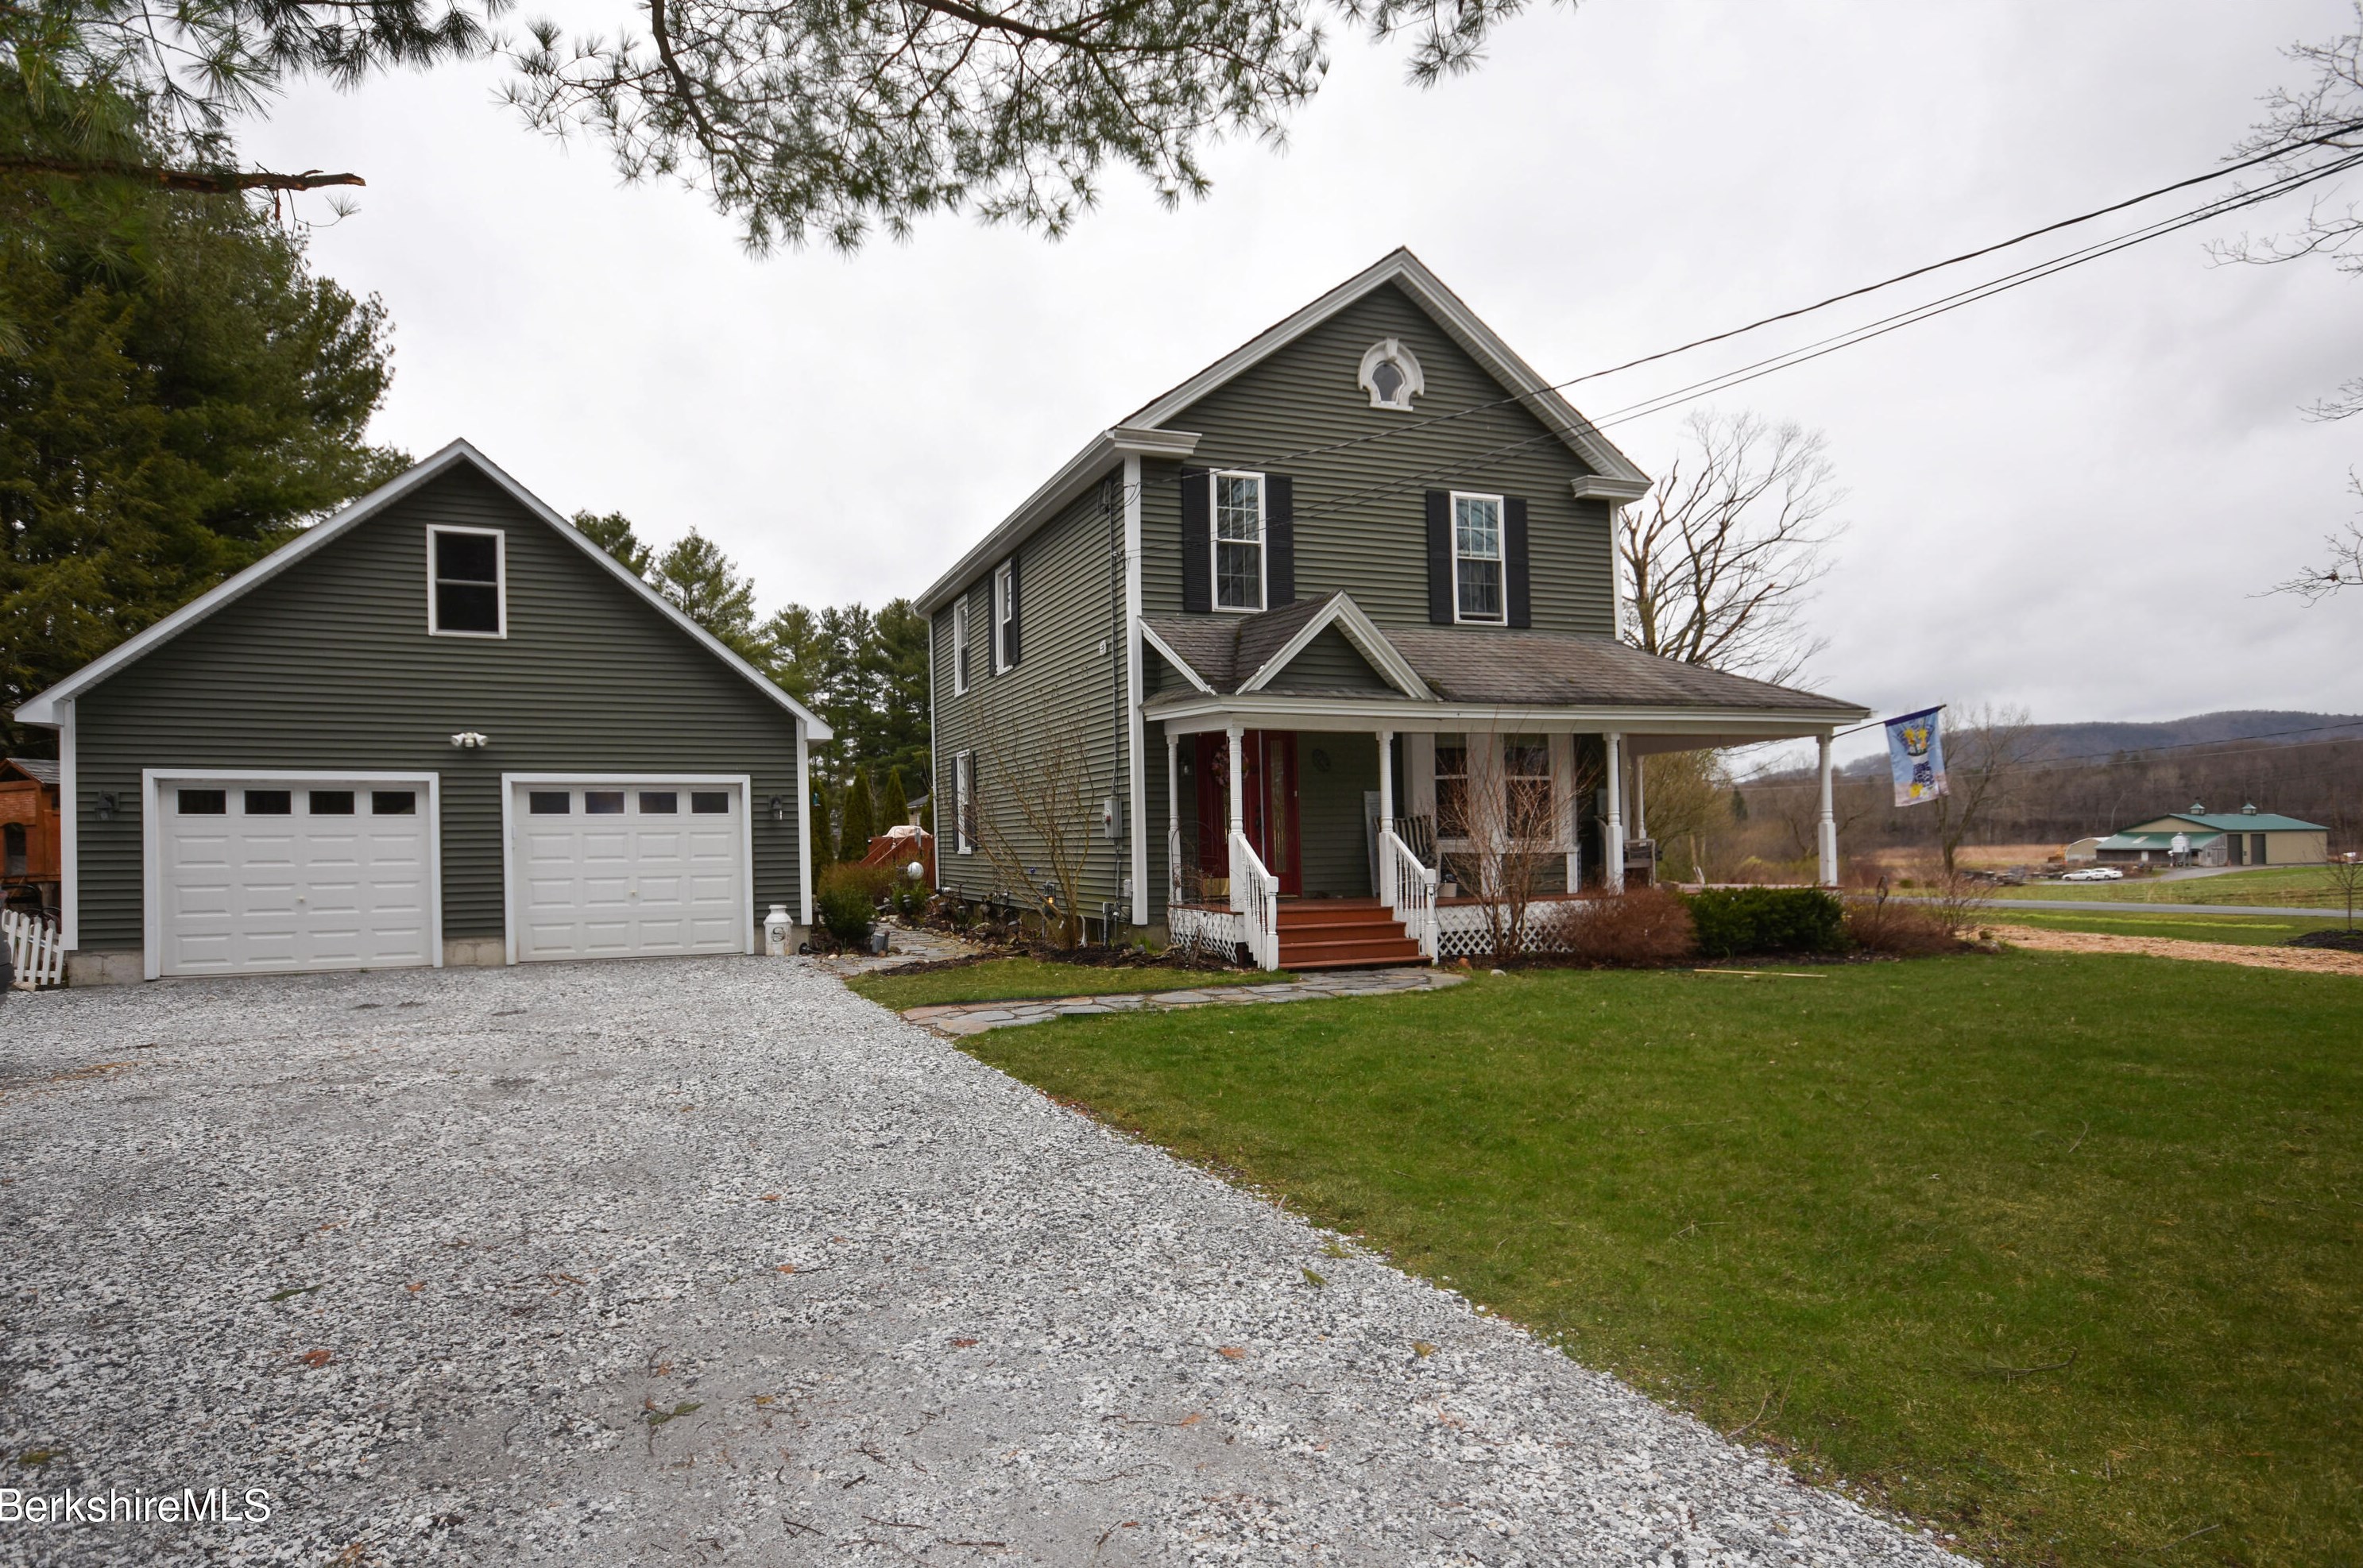 235 Fort Hill Ave, Pittsfield, MA 01201